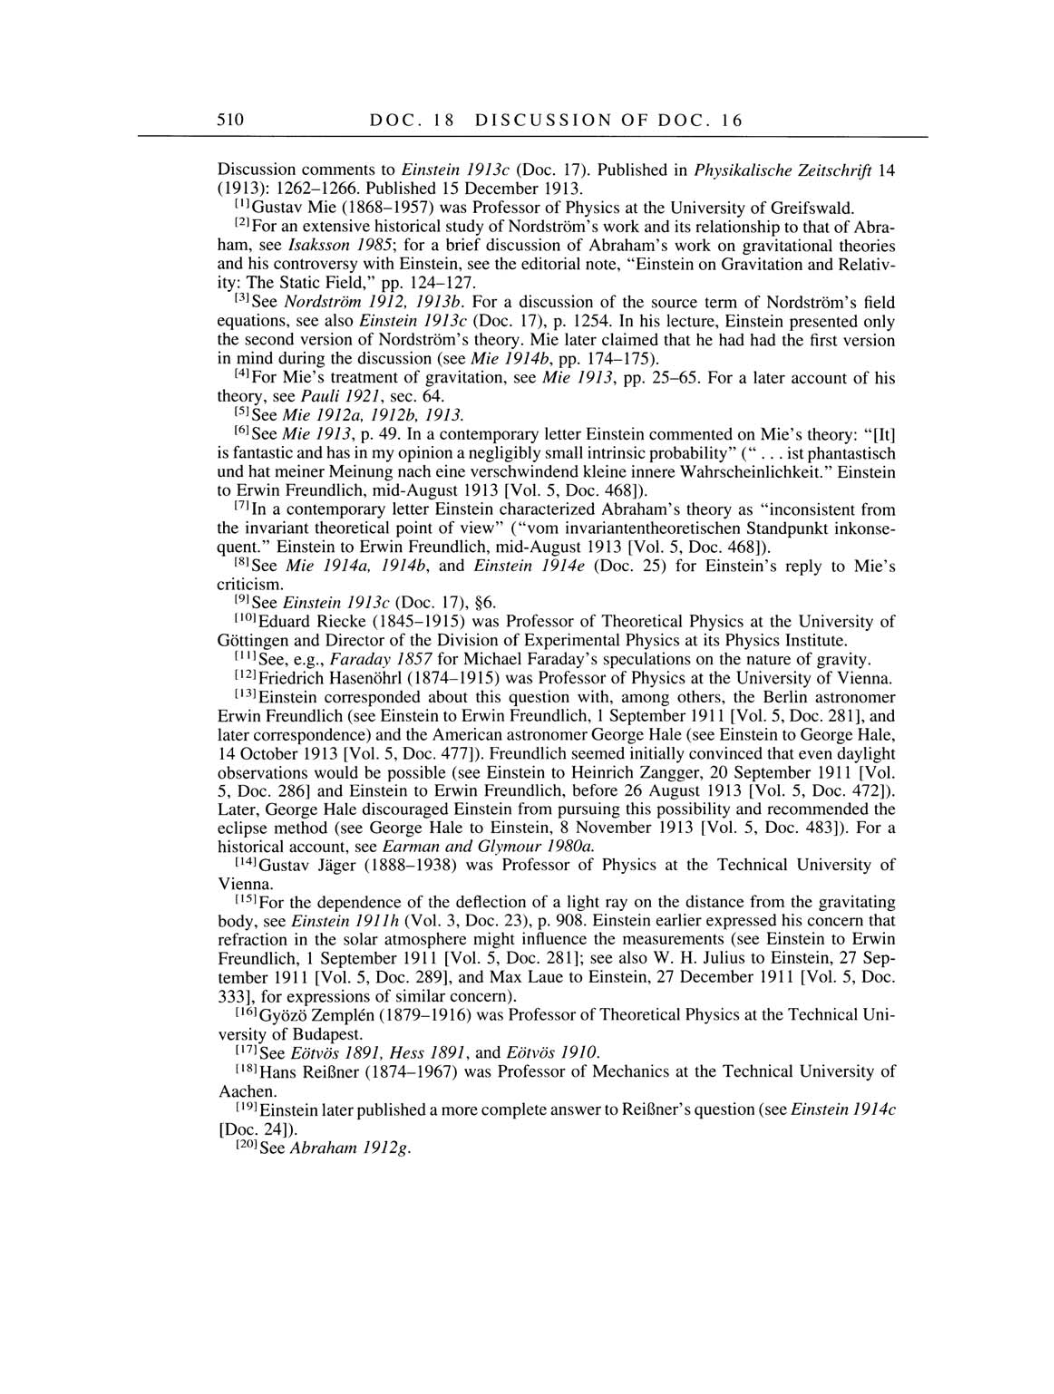 Volume 4: The Swiss Years: Writings 1912-1914 page 510